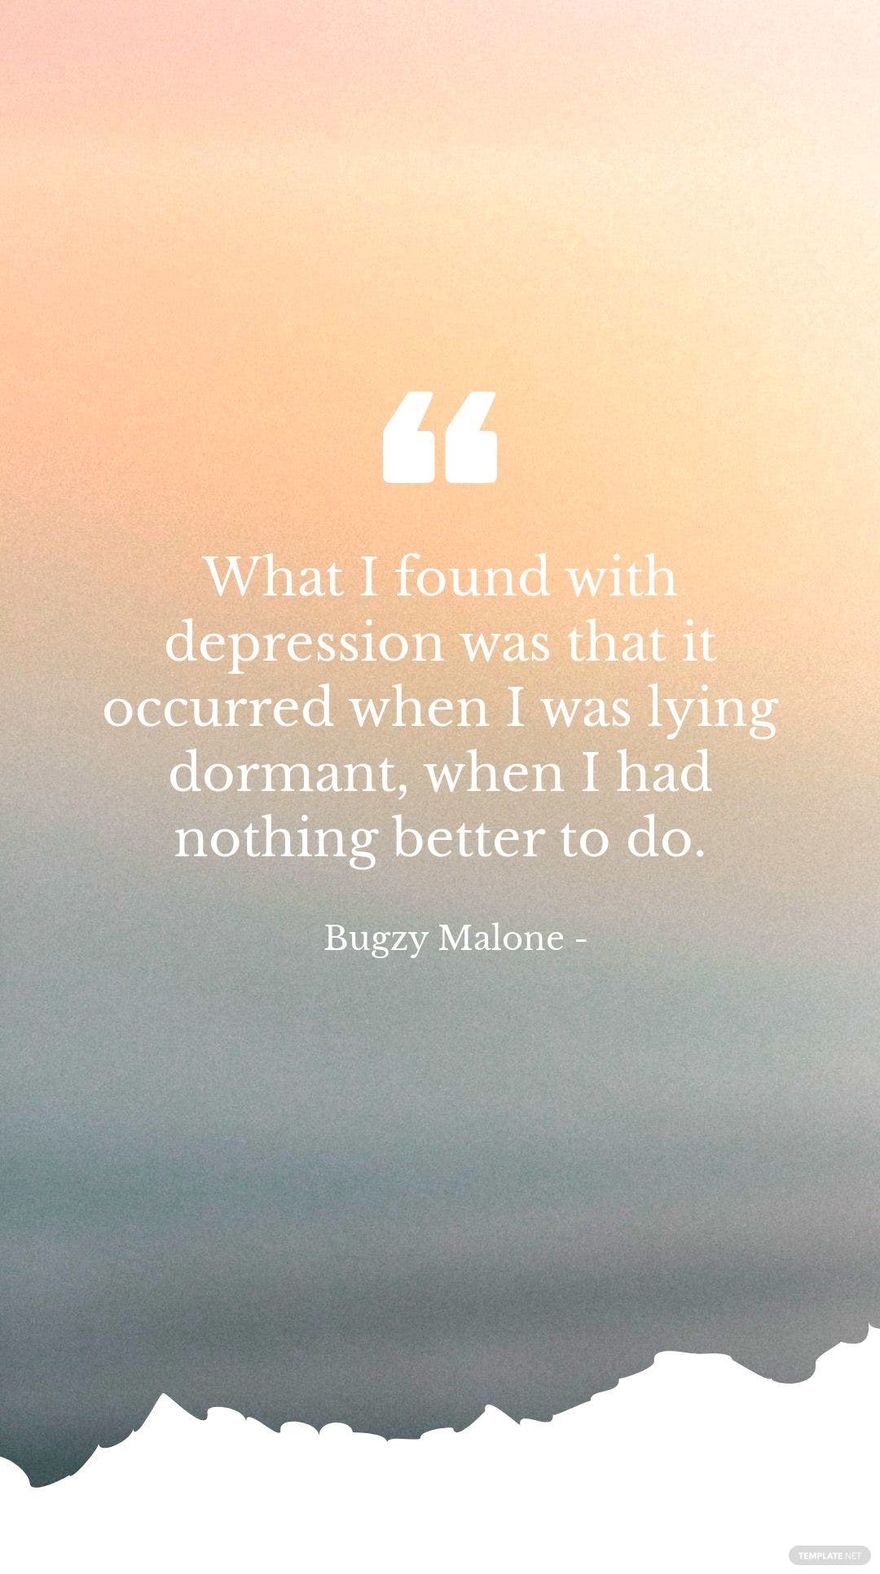 Bugzy Malone - What I found with depression was that it occurred when I was lying dormant, when I had nothing better to do.